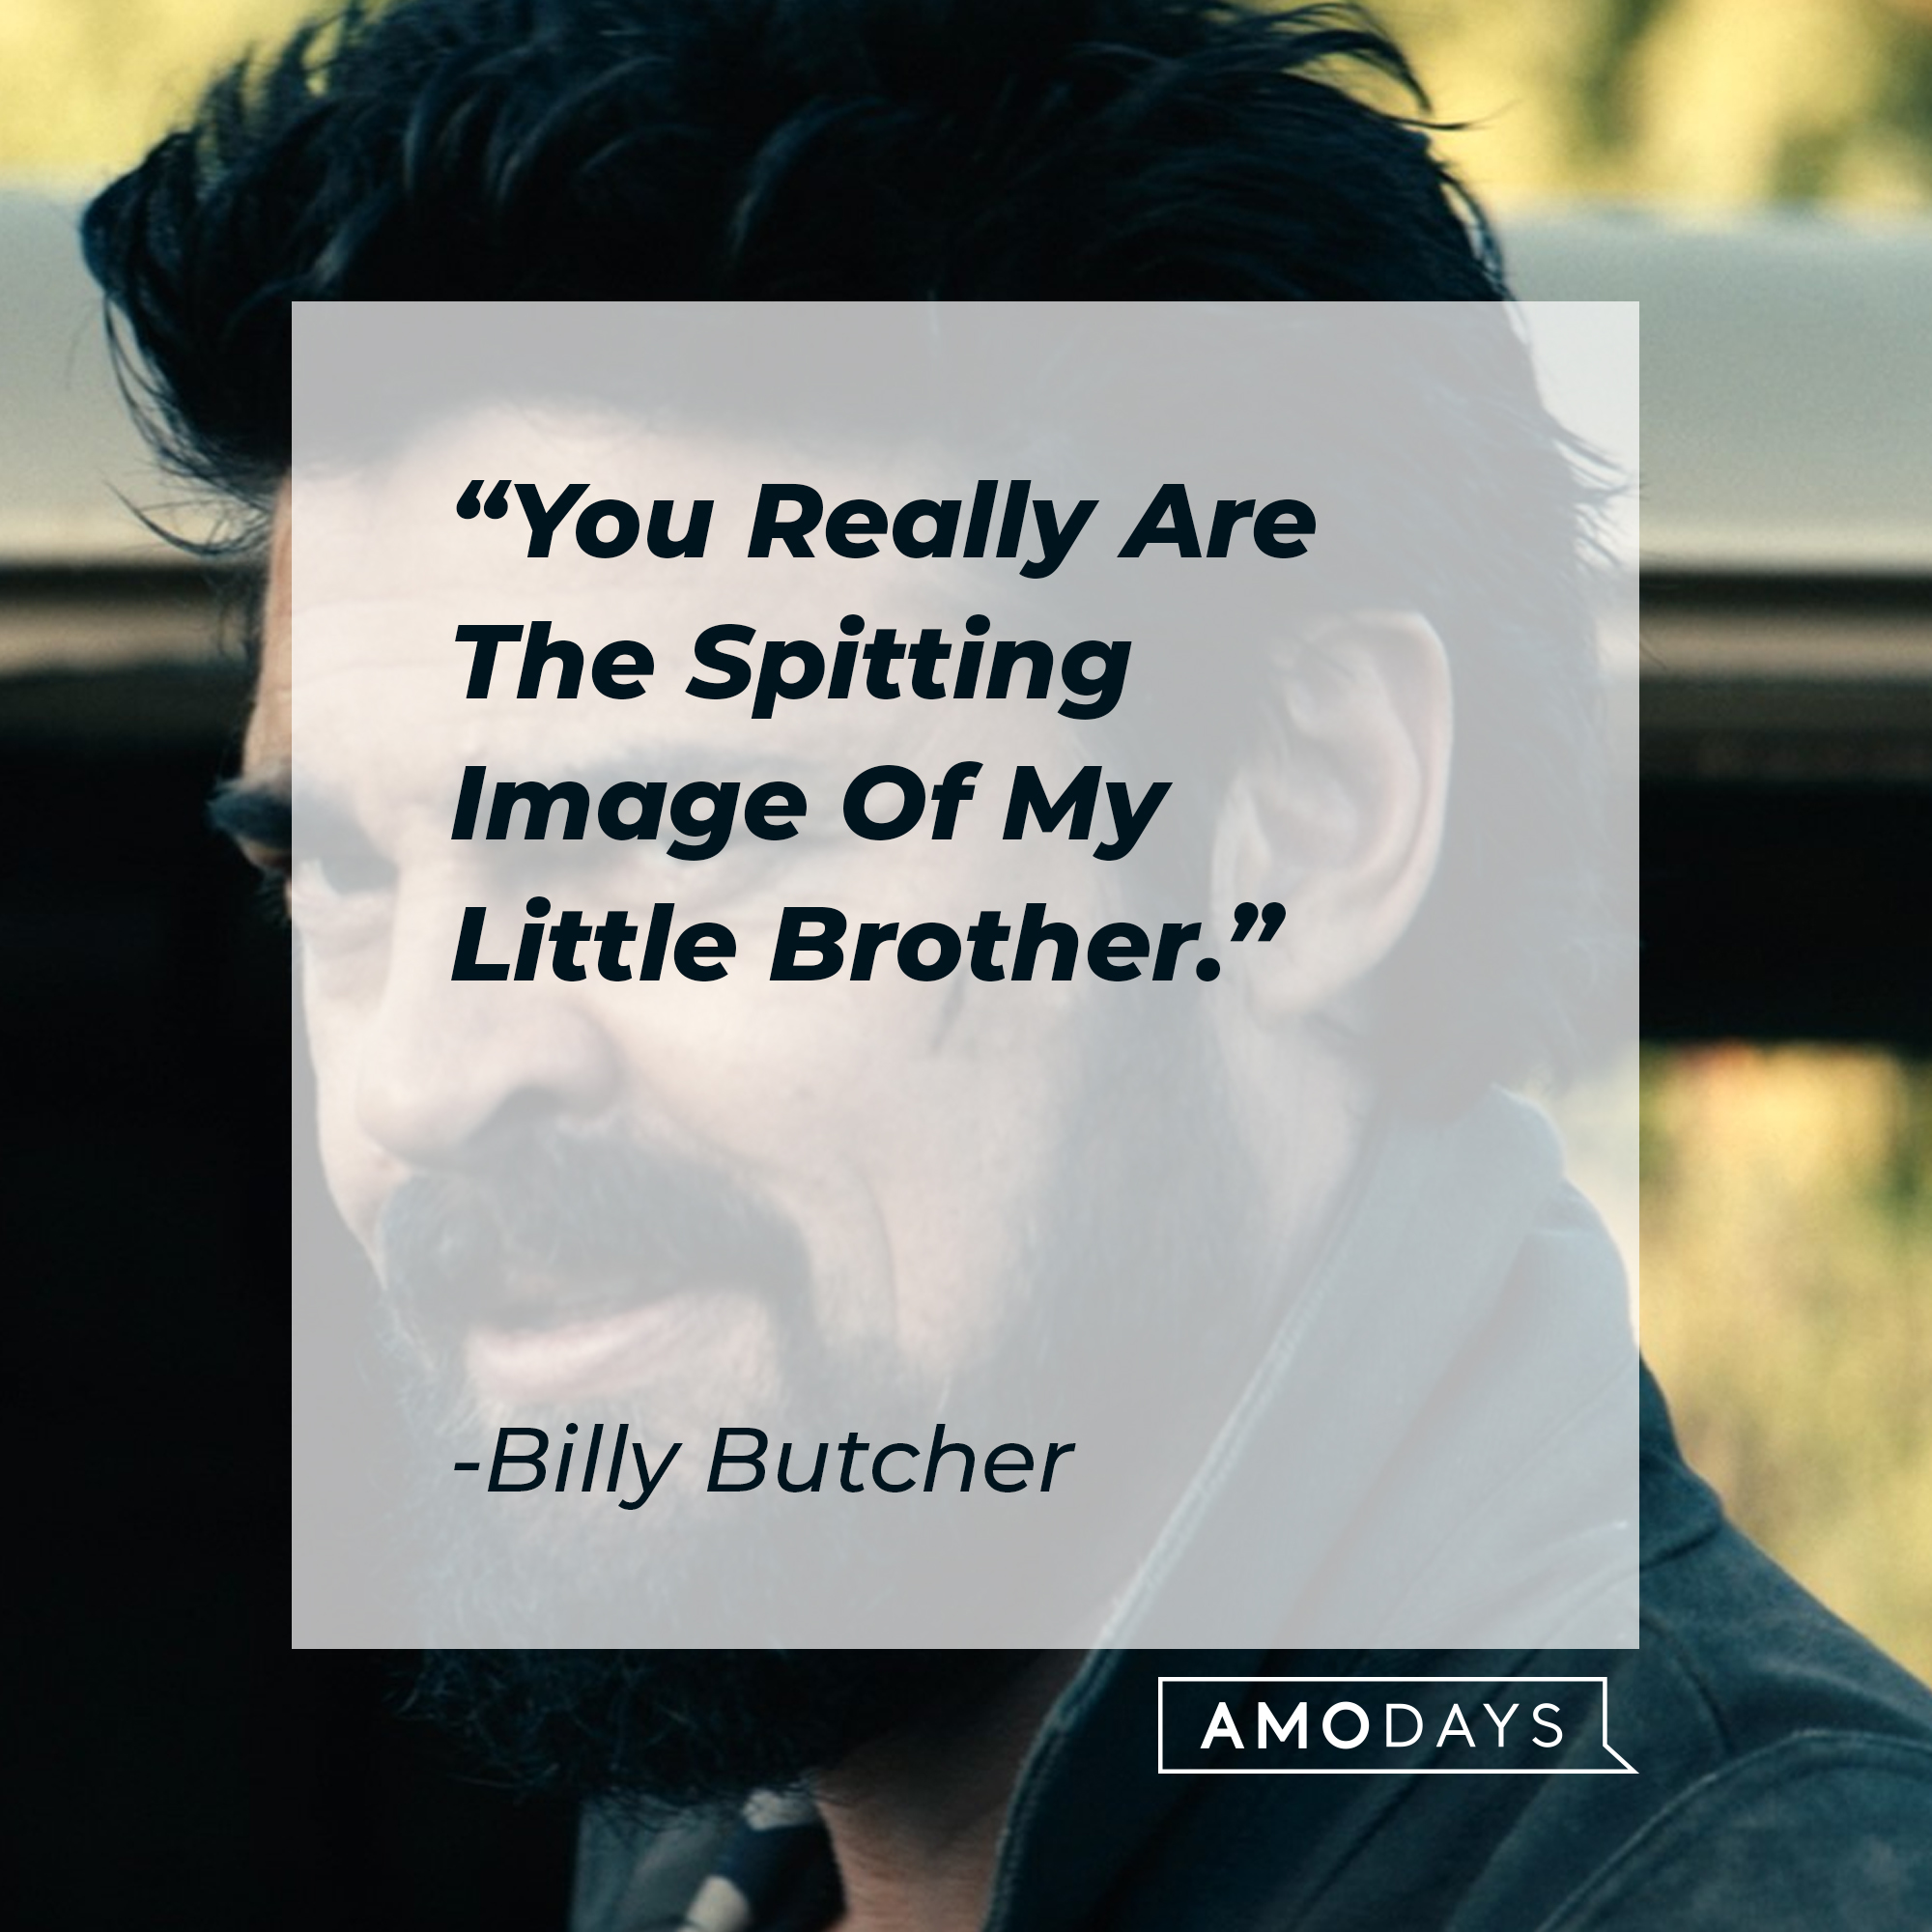 Billy Butcher's quote: "You Really Are The Spitting Image Of My Little Brother." | Source: Facebook.com/TheBoysTV